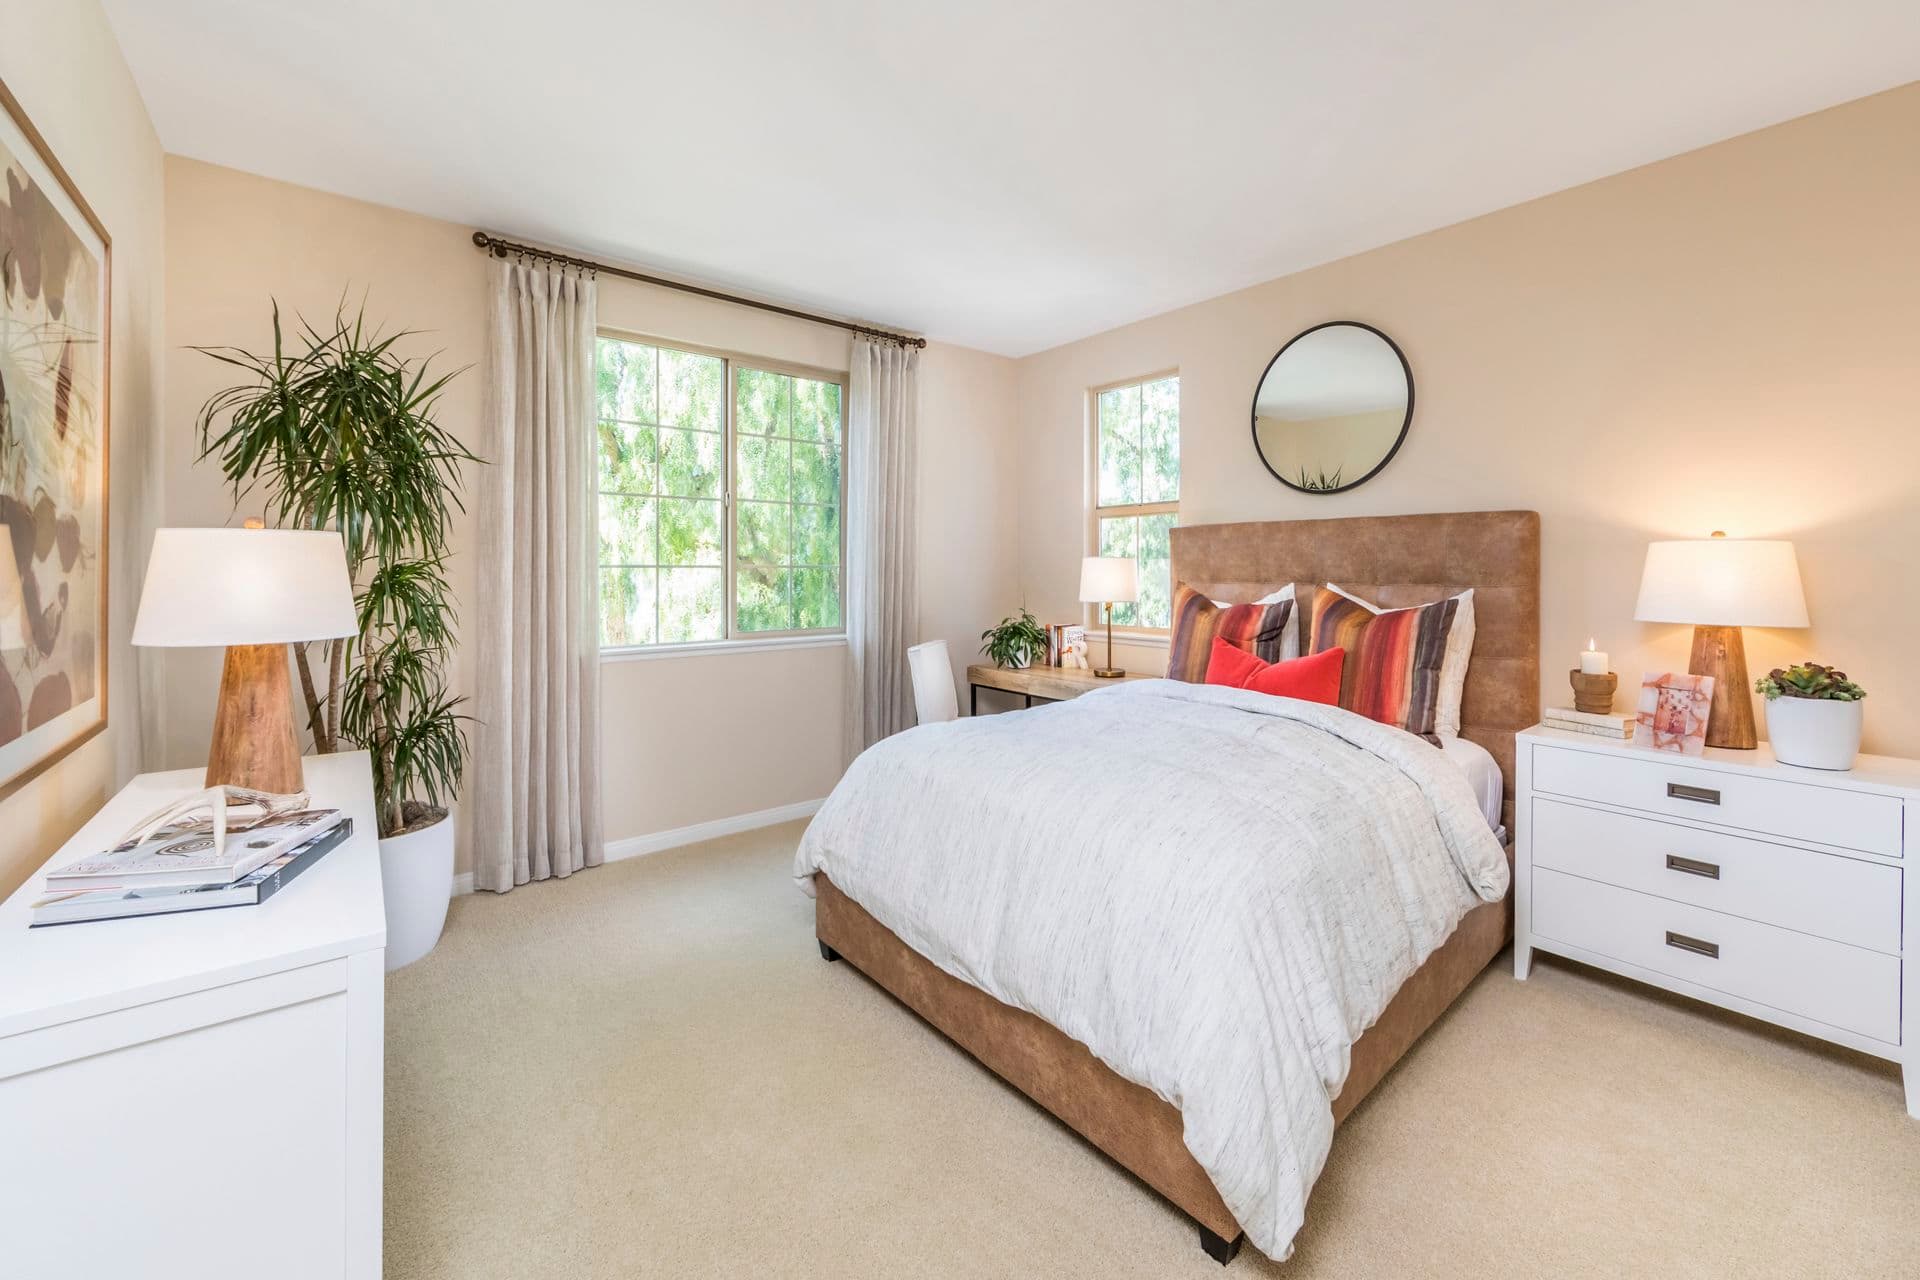 Interior view of bedroom at Mirasol Apartment Homes in Stonegate, Irvine, CA.